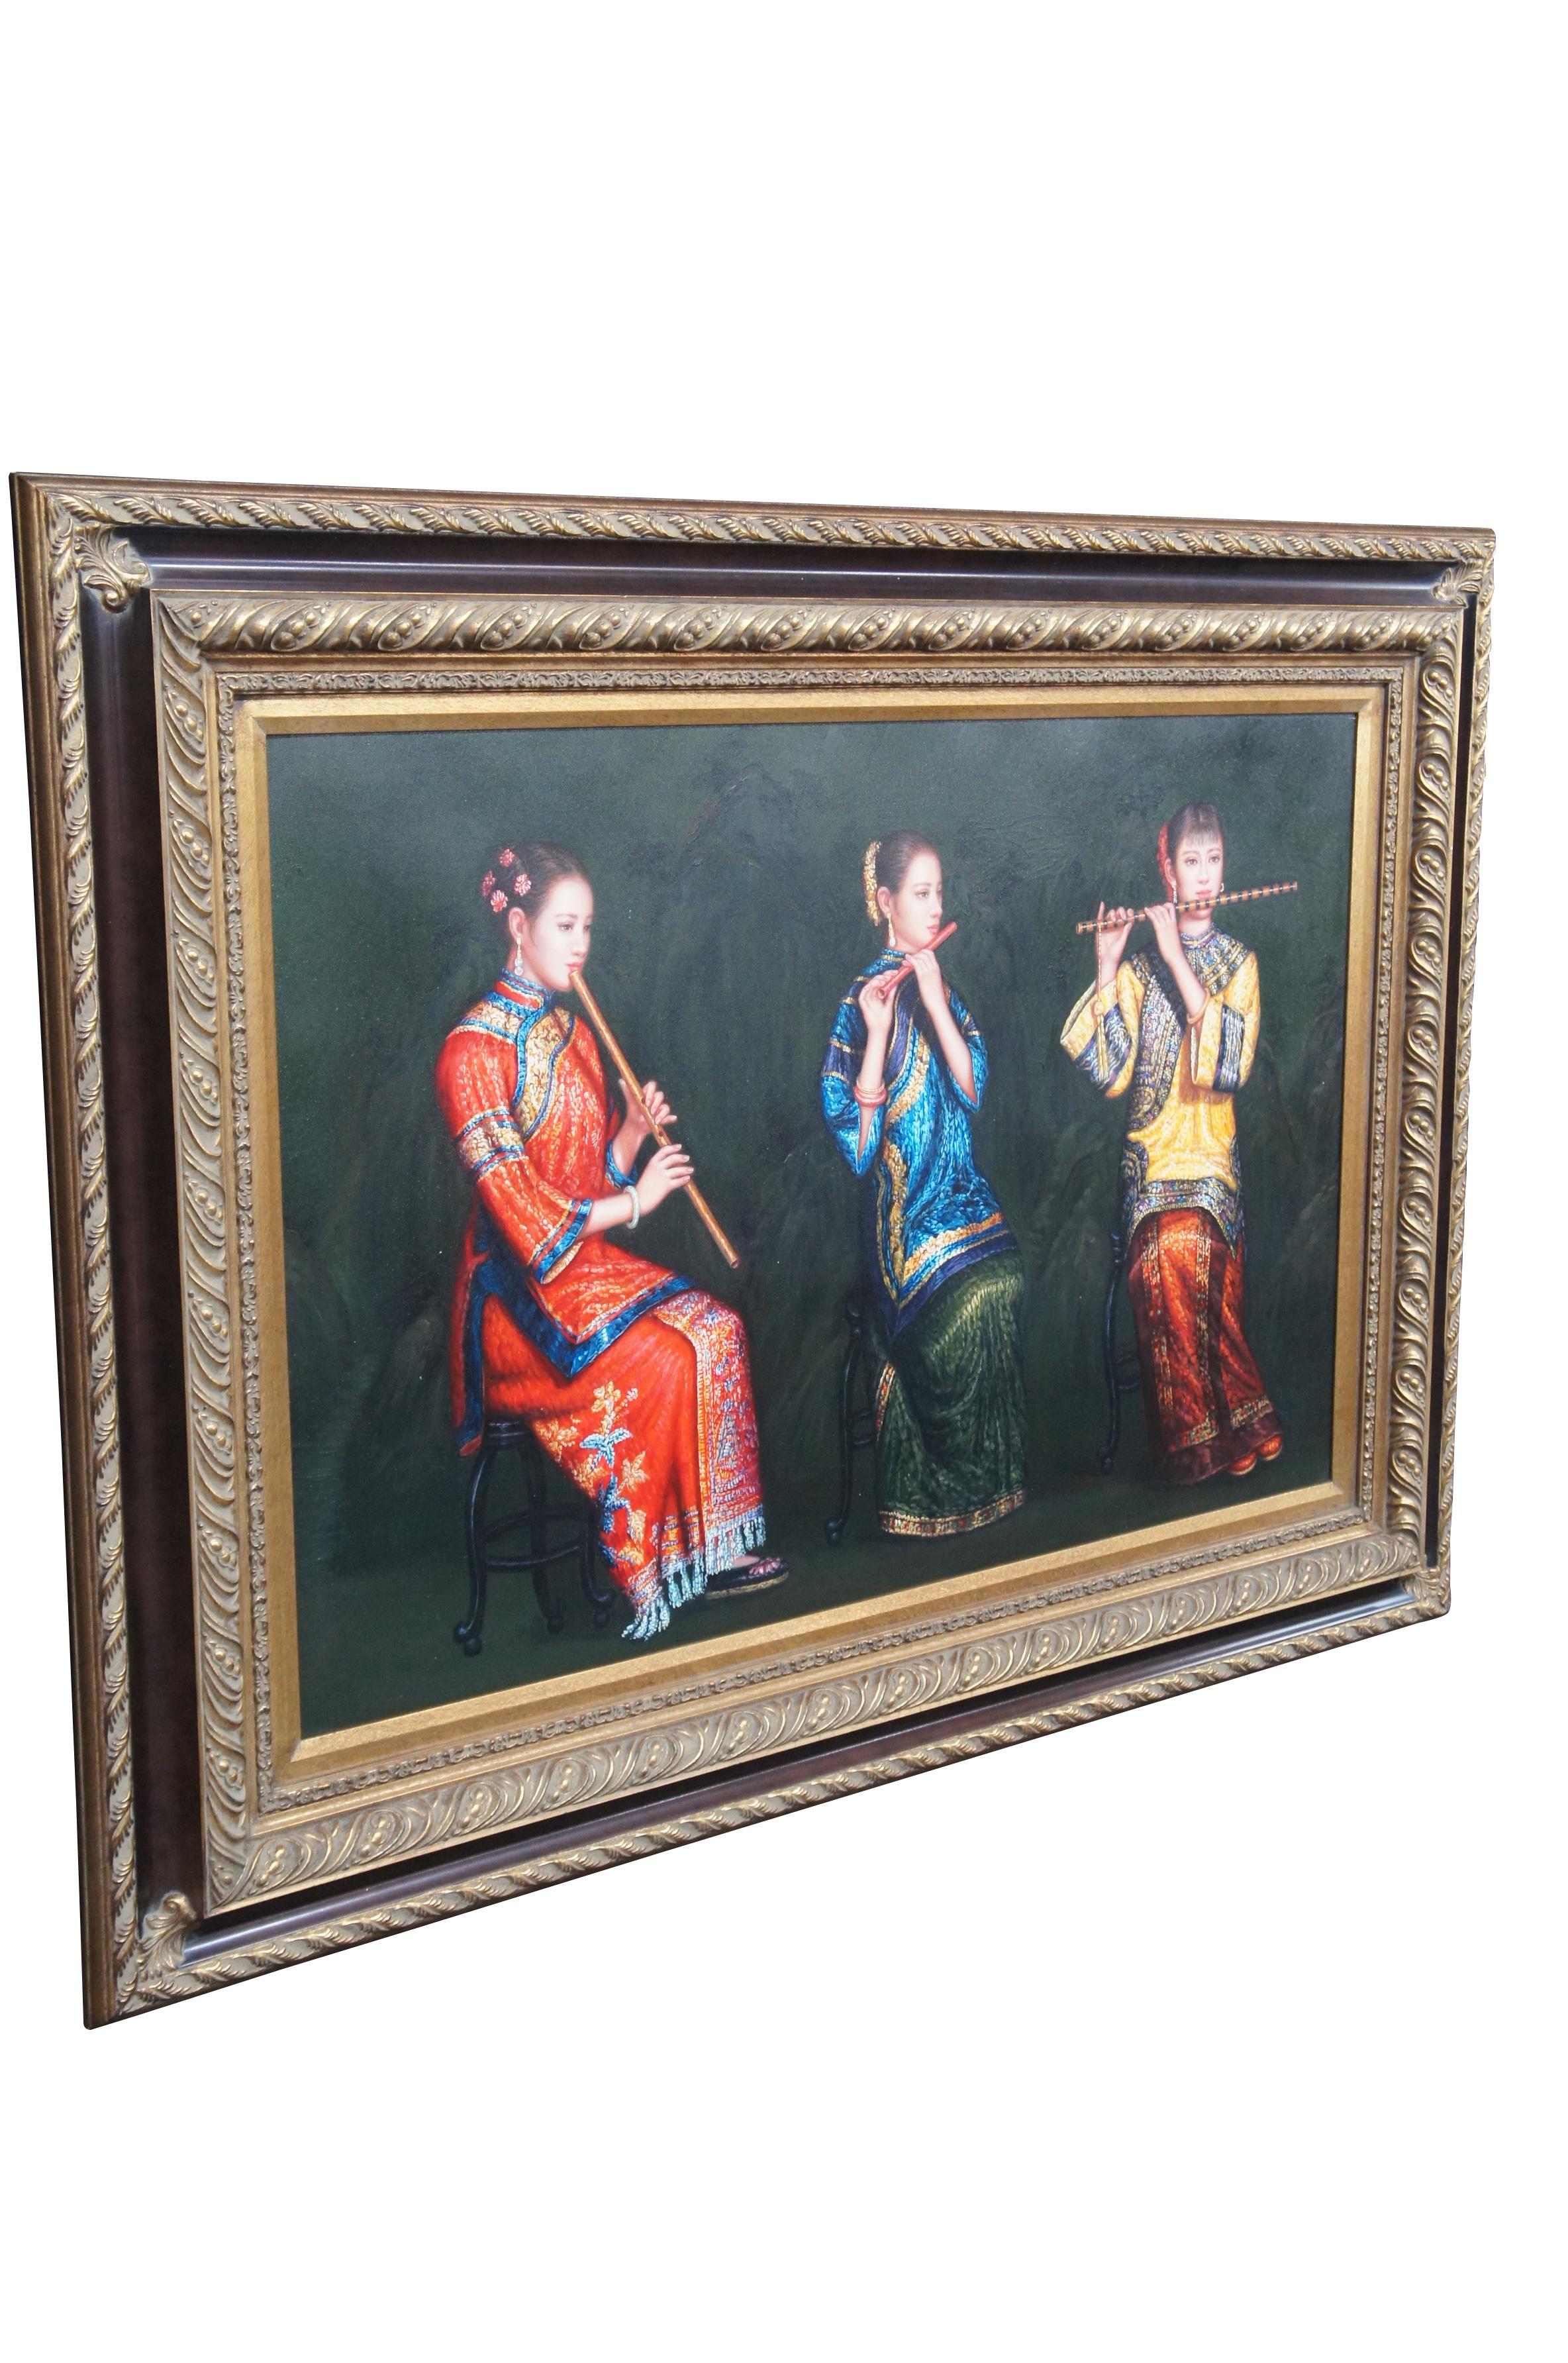 Vintage trio of Chinese woman playing flutes oil painting on canvas after Chen Yifei.  Features three young musicians in traditional court attire playing the Dizi / bamboo flutes.

Chen Yifei (Chinese: 陈逸飞; April 12, 1946 – April 10, 2005) was a